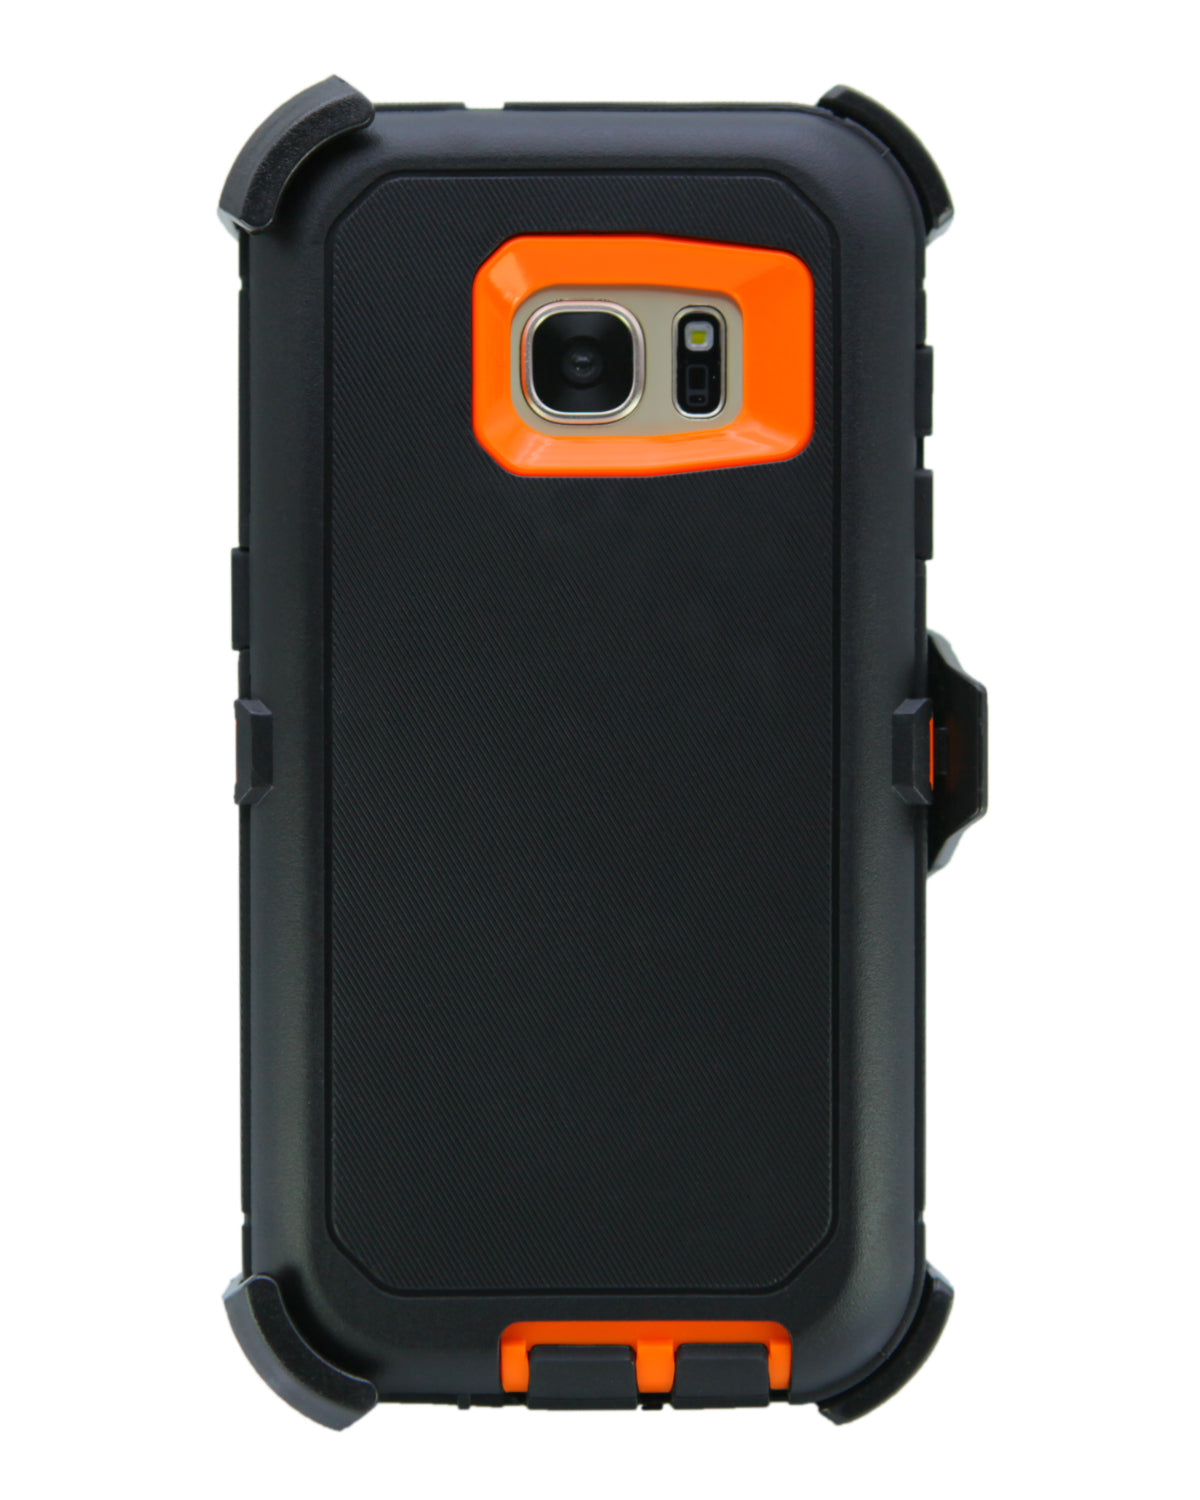  Galaxy S9+ ManchVegas - Manchester, New Hampshire Las Vegas  Sign Style Case : Cell Phones & Accessories